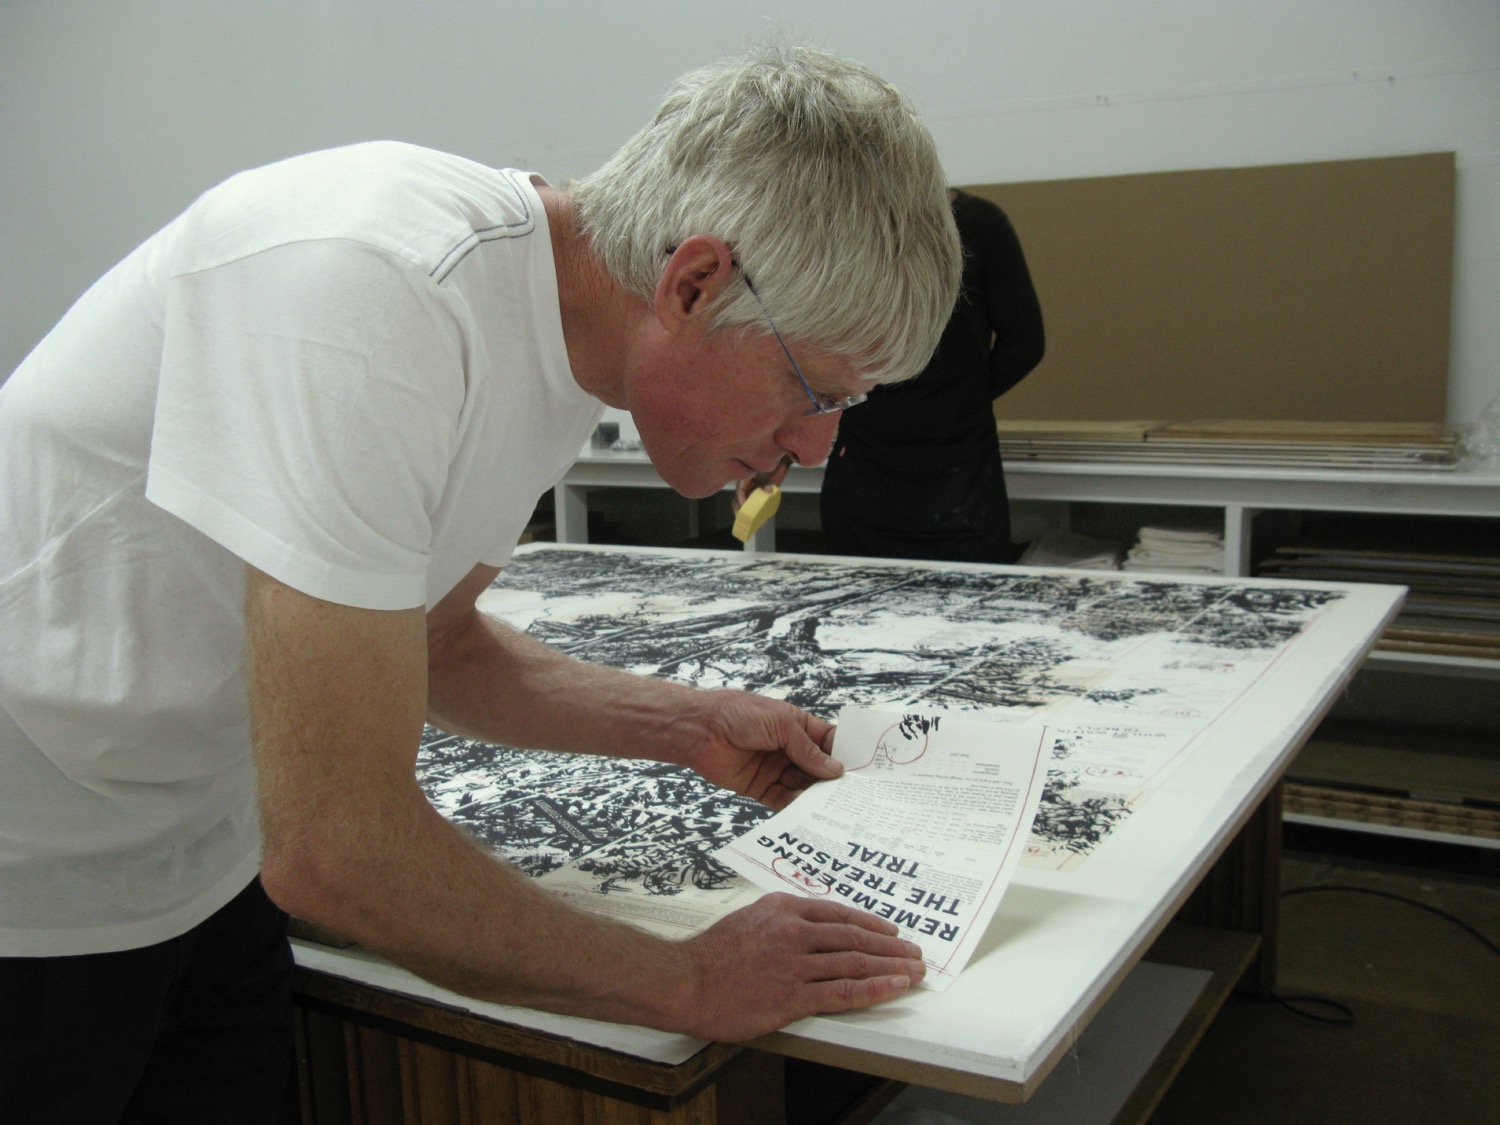 Mark Attwood glueing down a section of a print by William Kentridge.